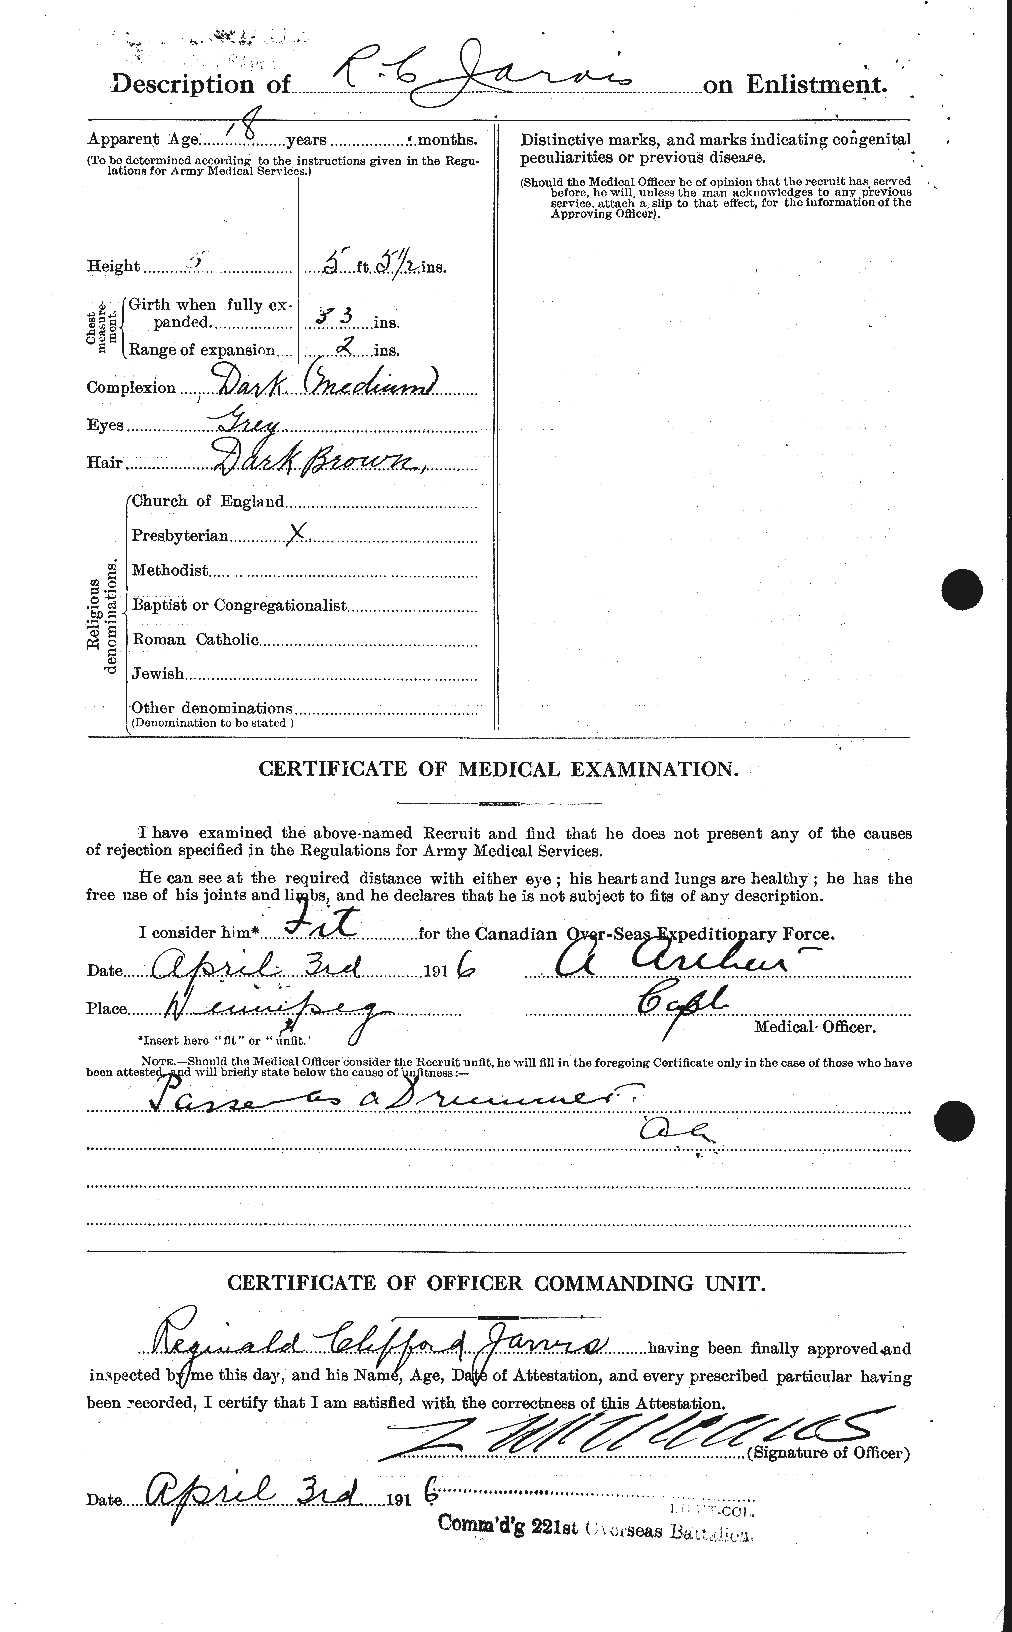 Personnel Records of the First World War - CEF 415848b